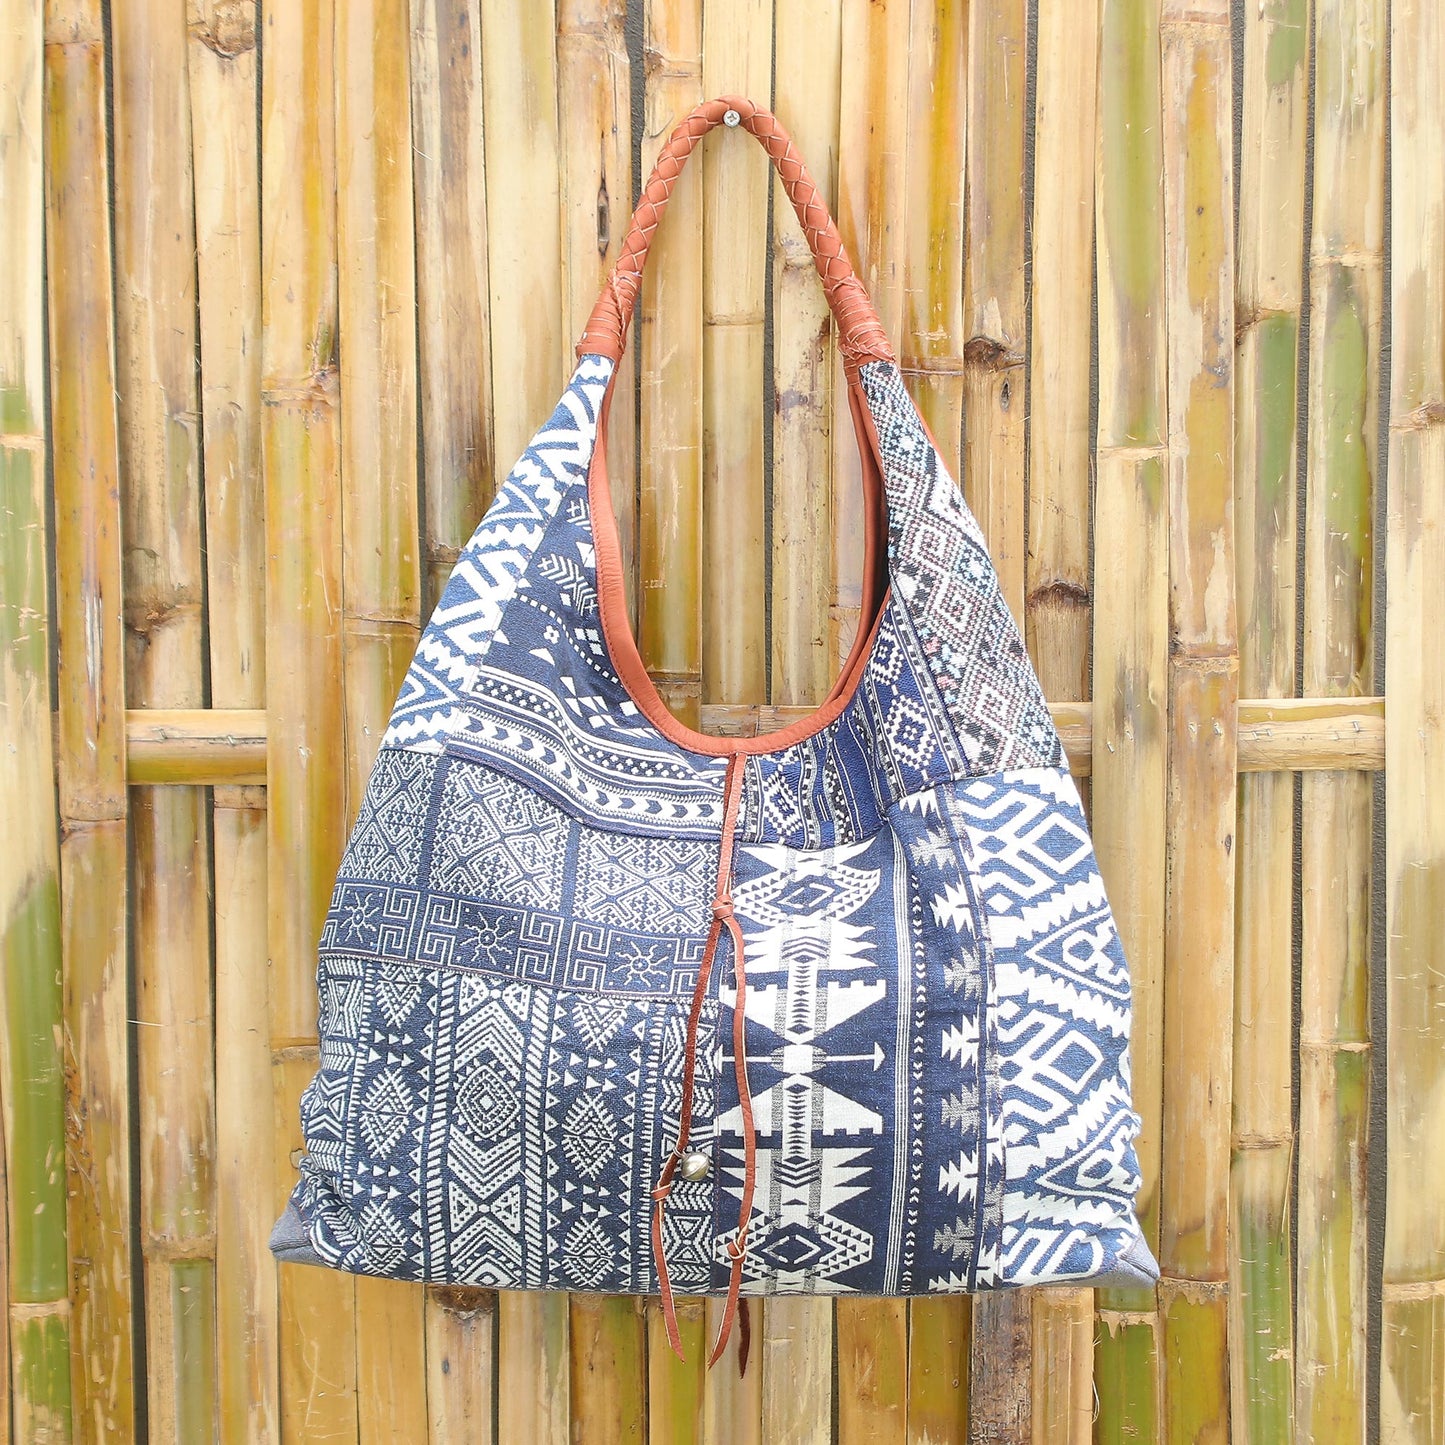 Lapis Geometry Leather Accent Cotton Blend Hobo Bag in Lapis and White